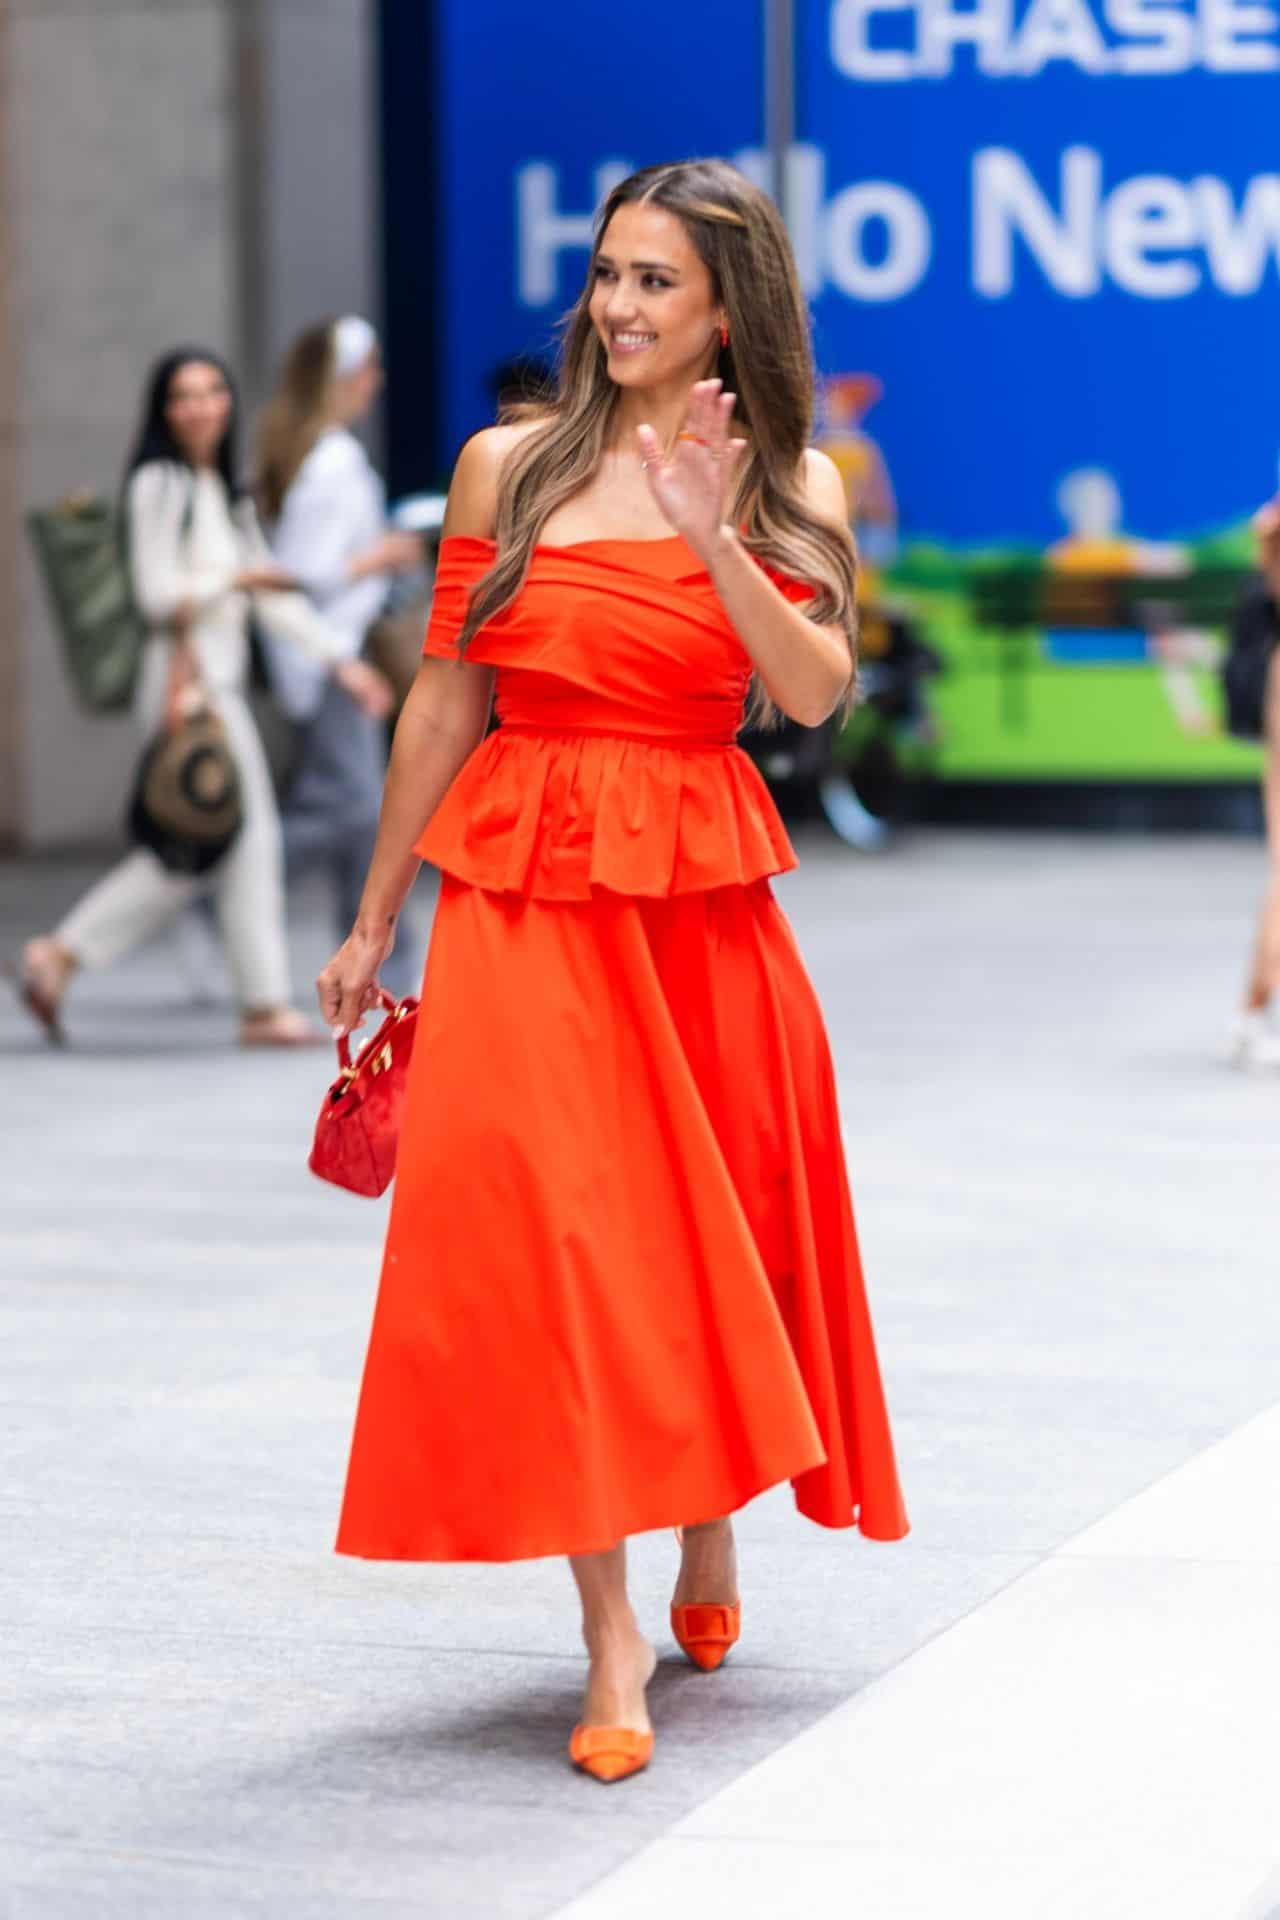 Jessica Alba Amazes in Red Sleeveless Top and Skirt in New York